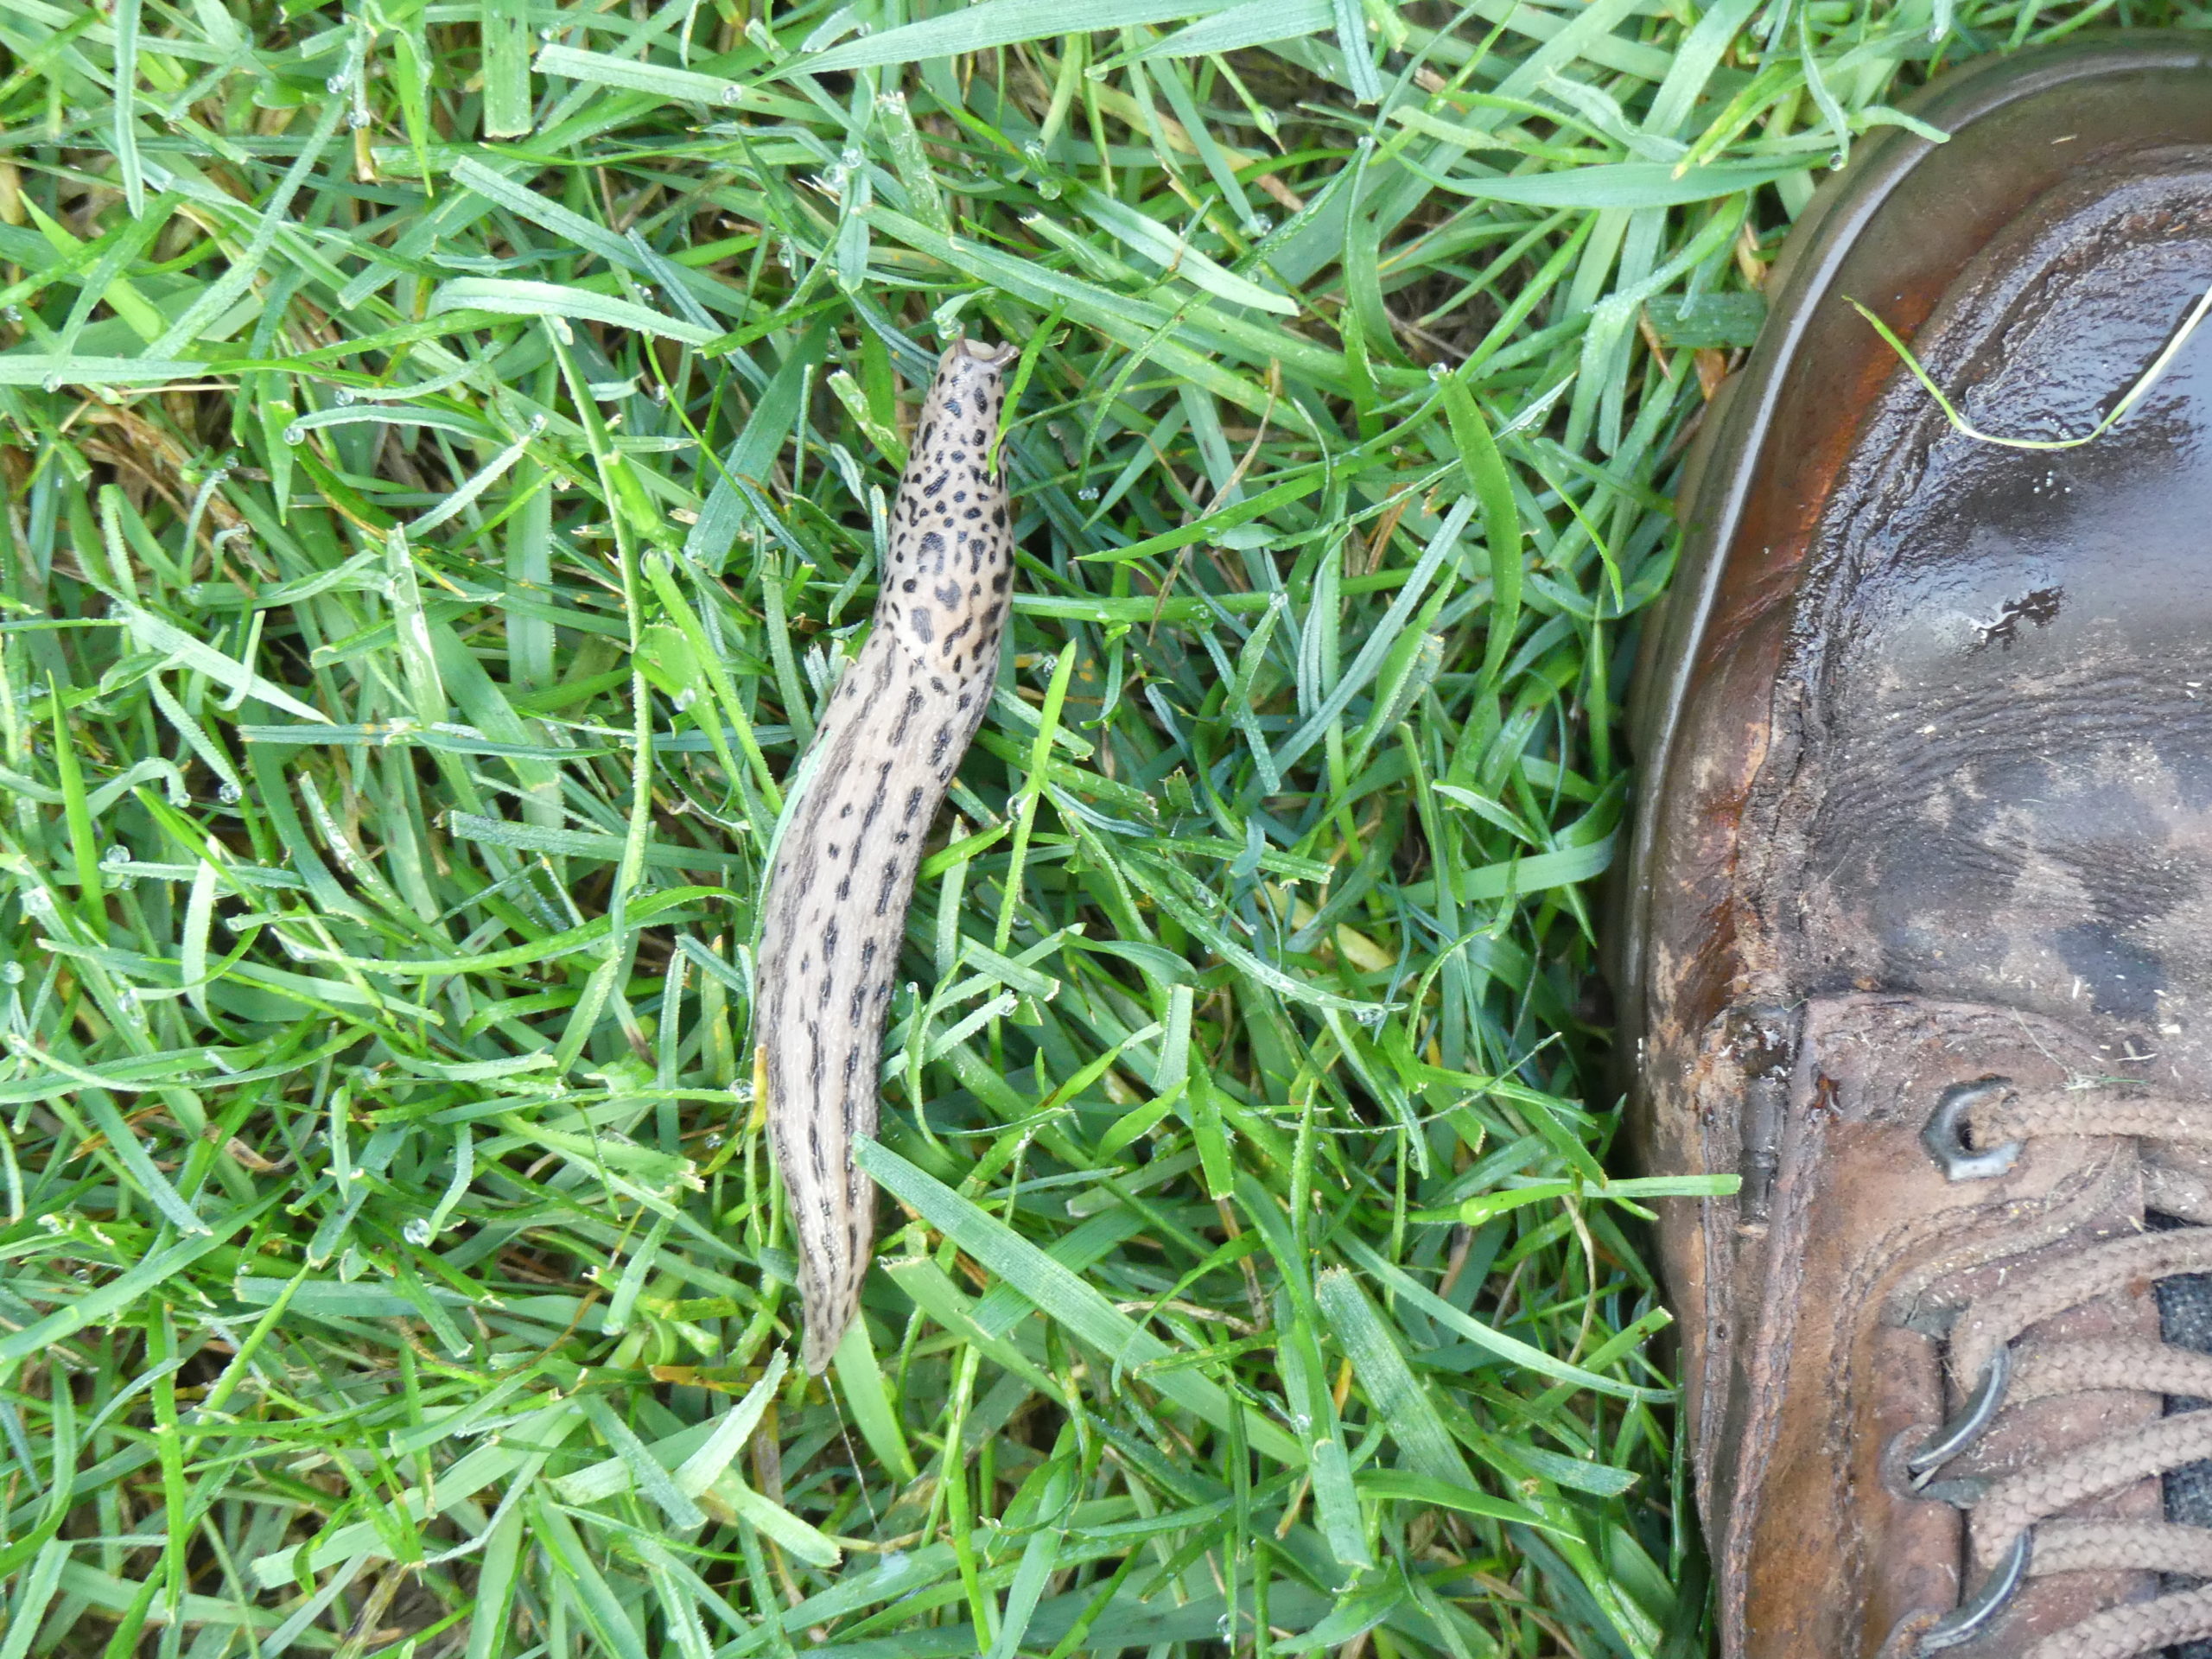 This Leopard slug, also known as the common gray slug, (Limax maximus) is one of a few species found on our lawns and in our gardens. Rarely found during the day, they seek dark and damp spots until the sun goes down. Slugs and snails are easily managed with organic, chemical and home-made remedies like coffee grounds and beer in pie plates.